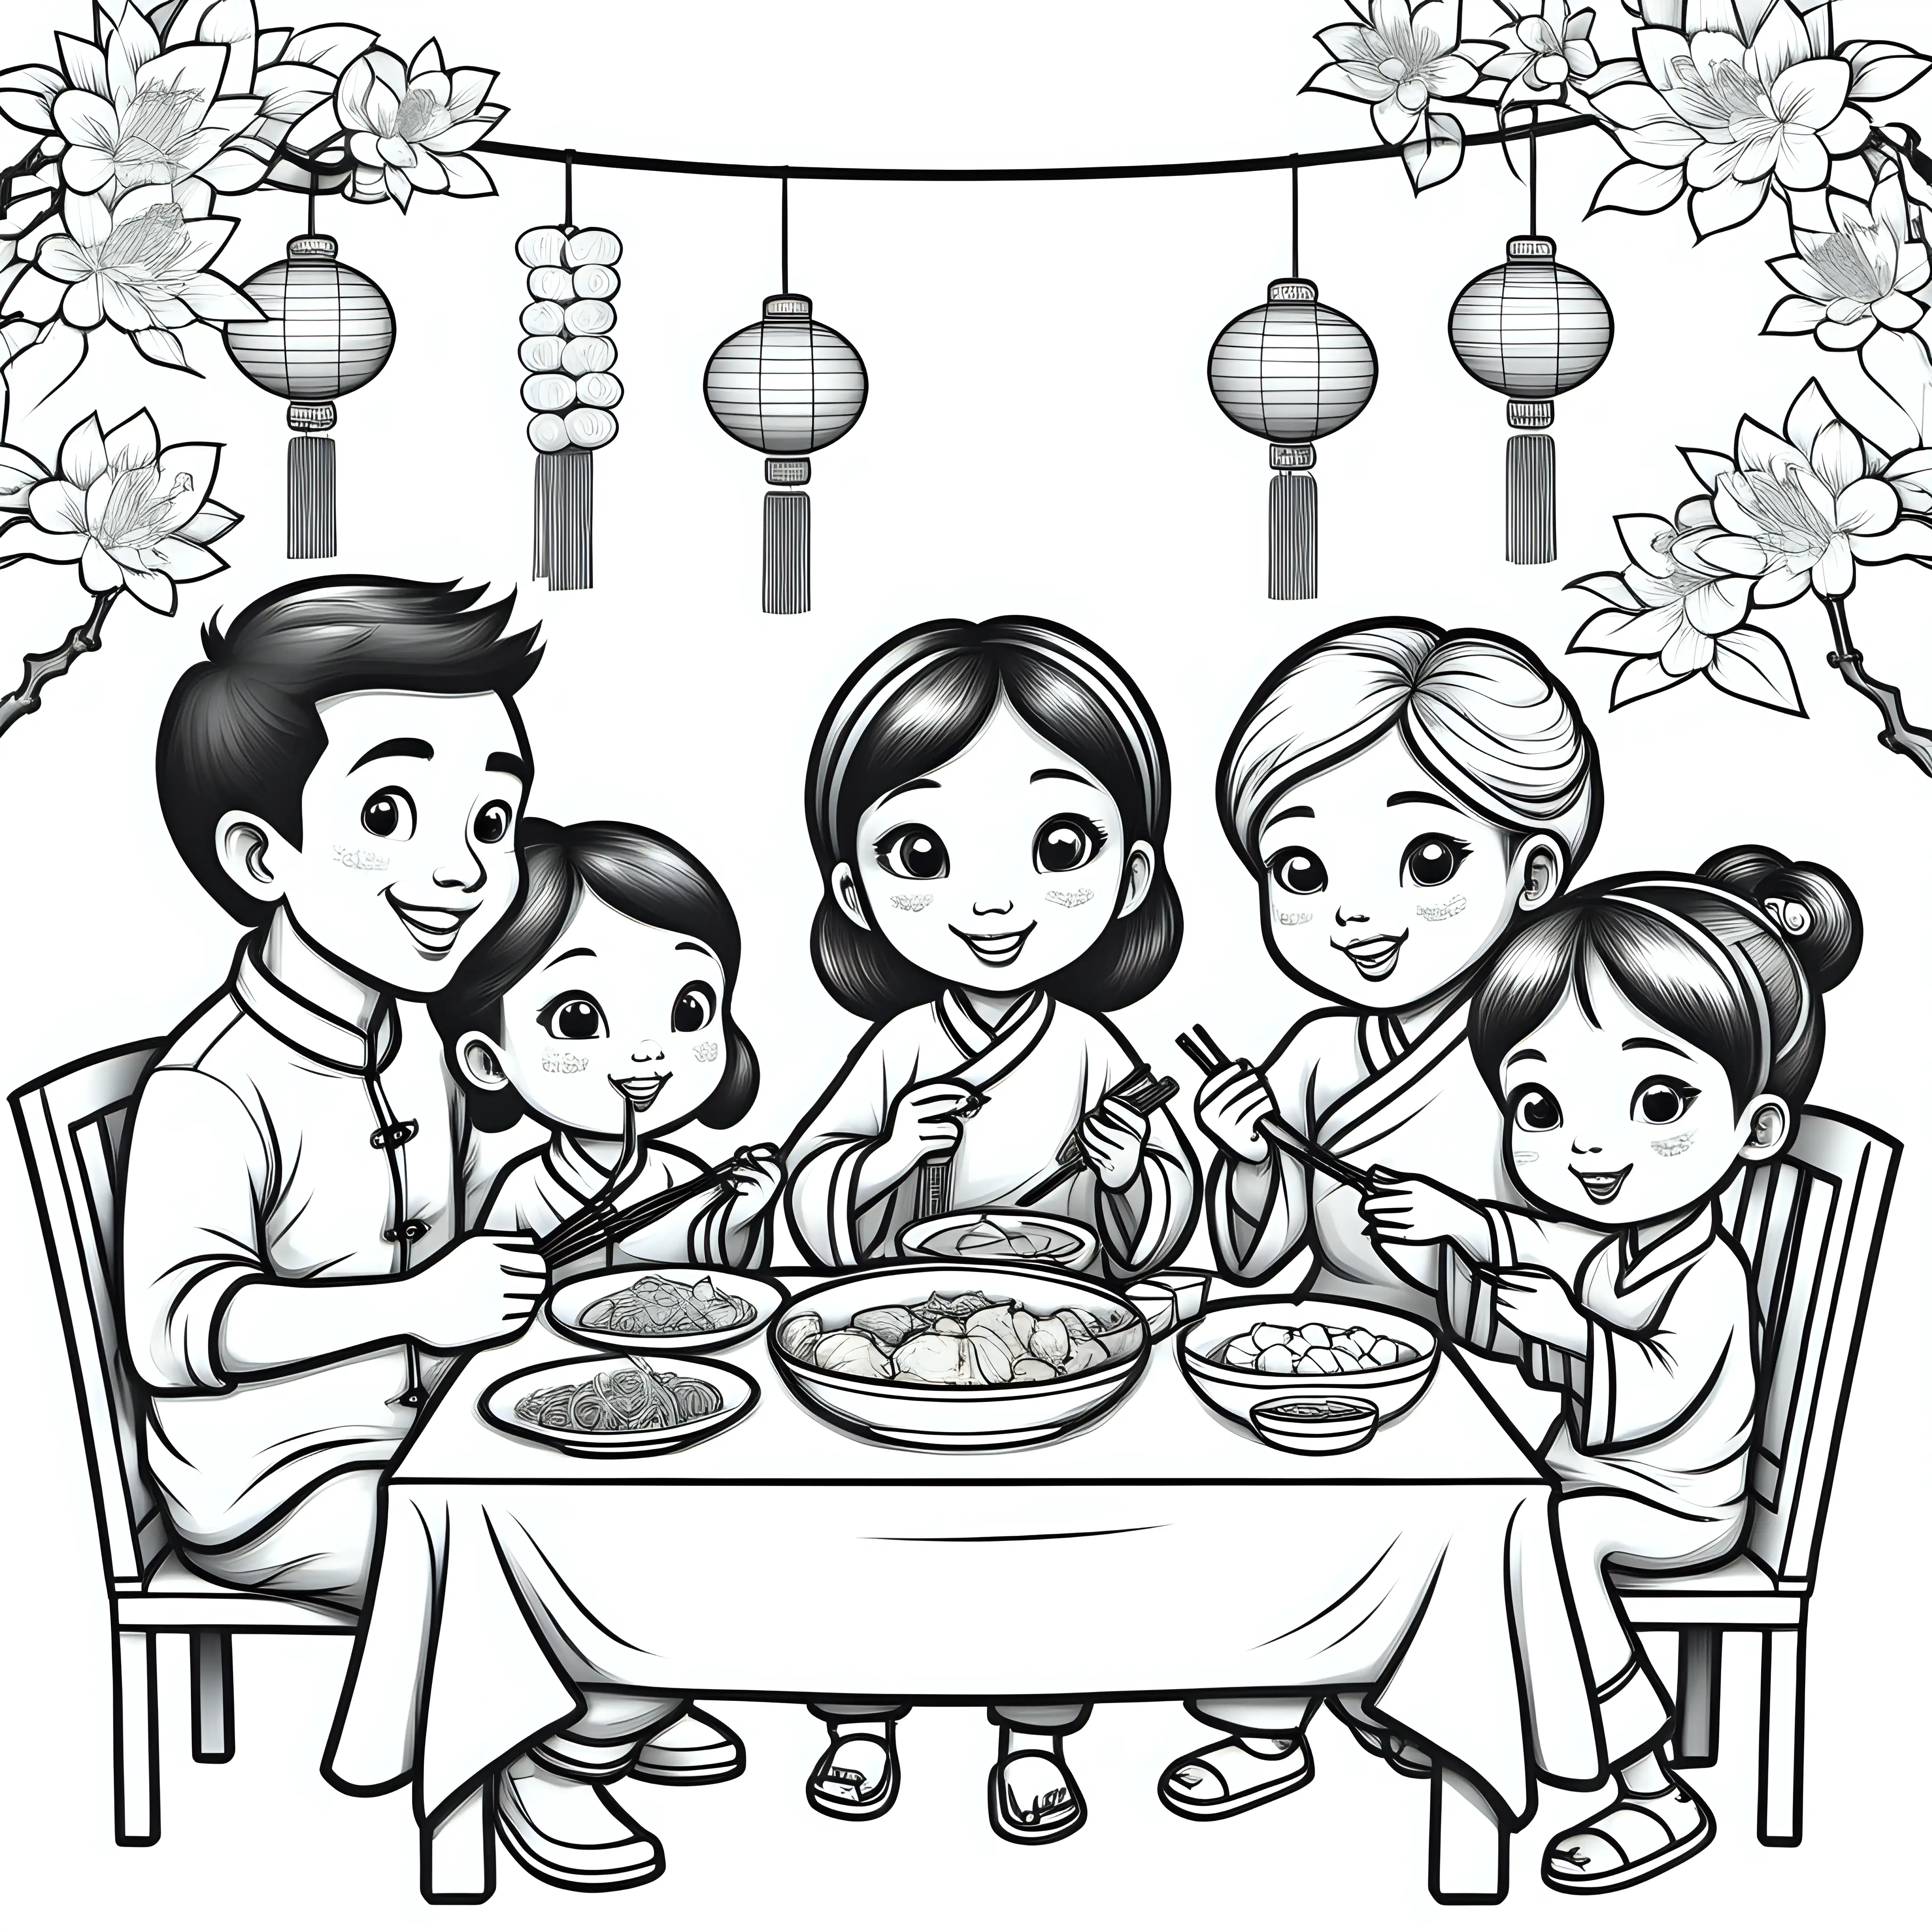 Lunar New Year Family Feast Coloring Page